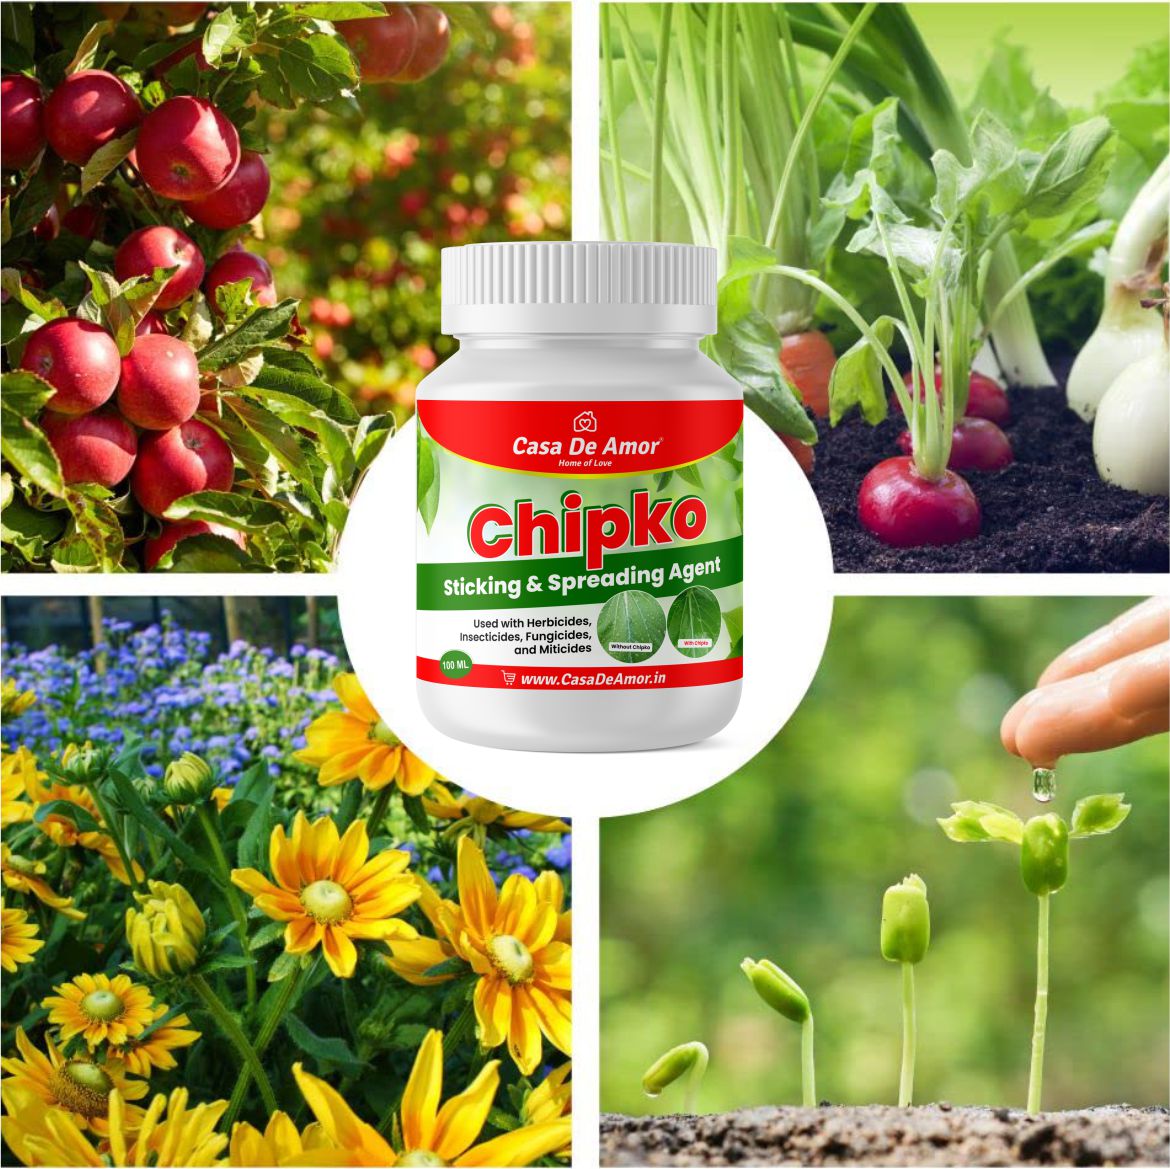 Casa De Amor Chipko Sticking & Spreading Agent (Used with Herbicides, Insecticides, Fungicides & Miticides) | Pest Control | Termite Treatment 